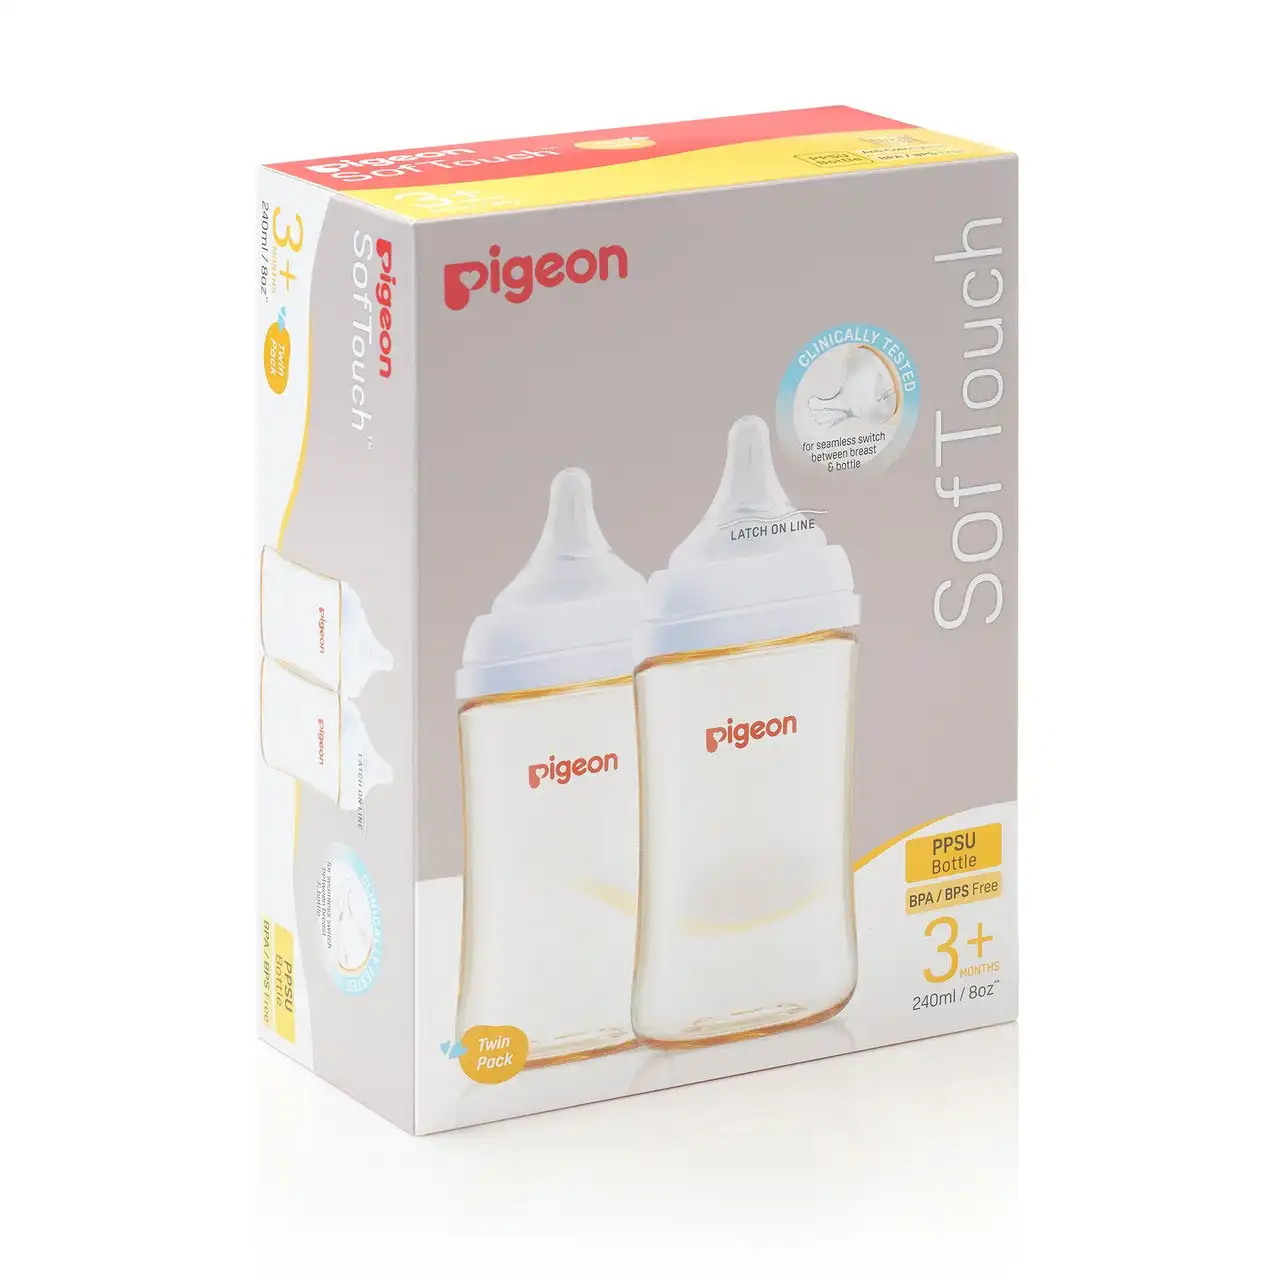 PIGEON Softouch Bottle PPSU Twin Pack 240ml